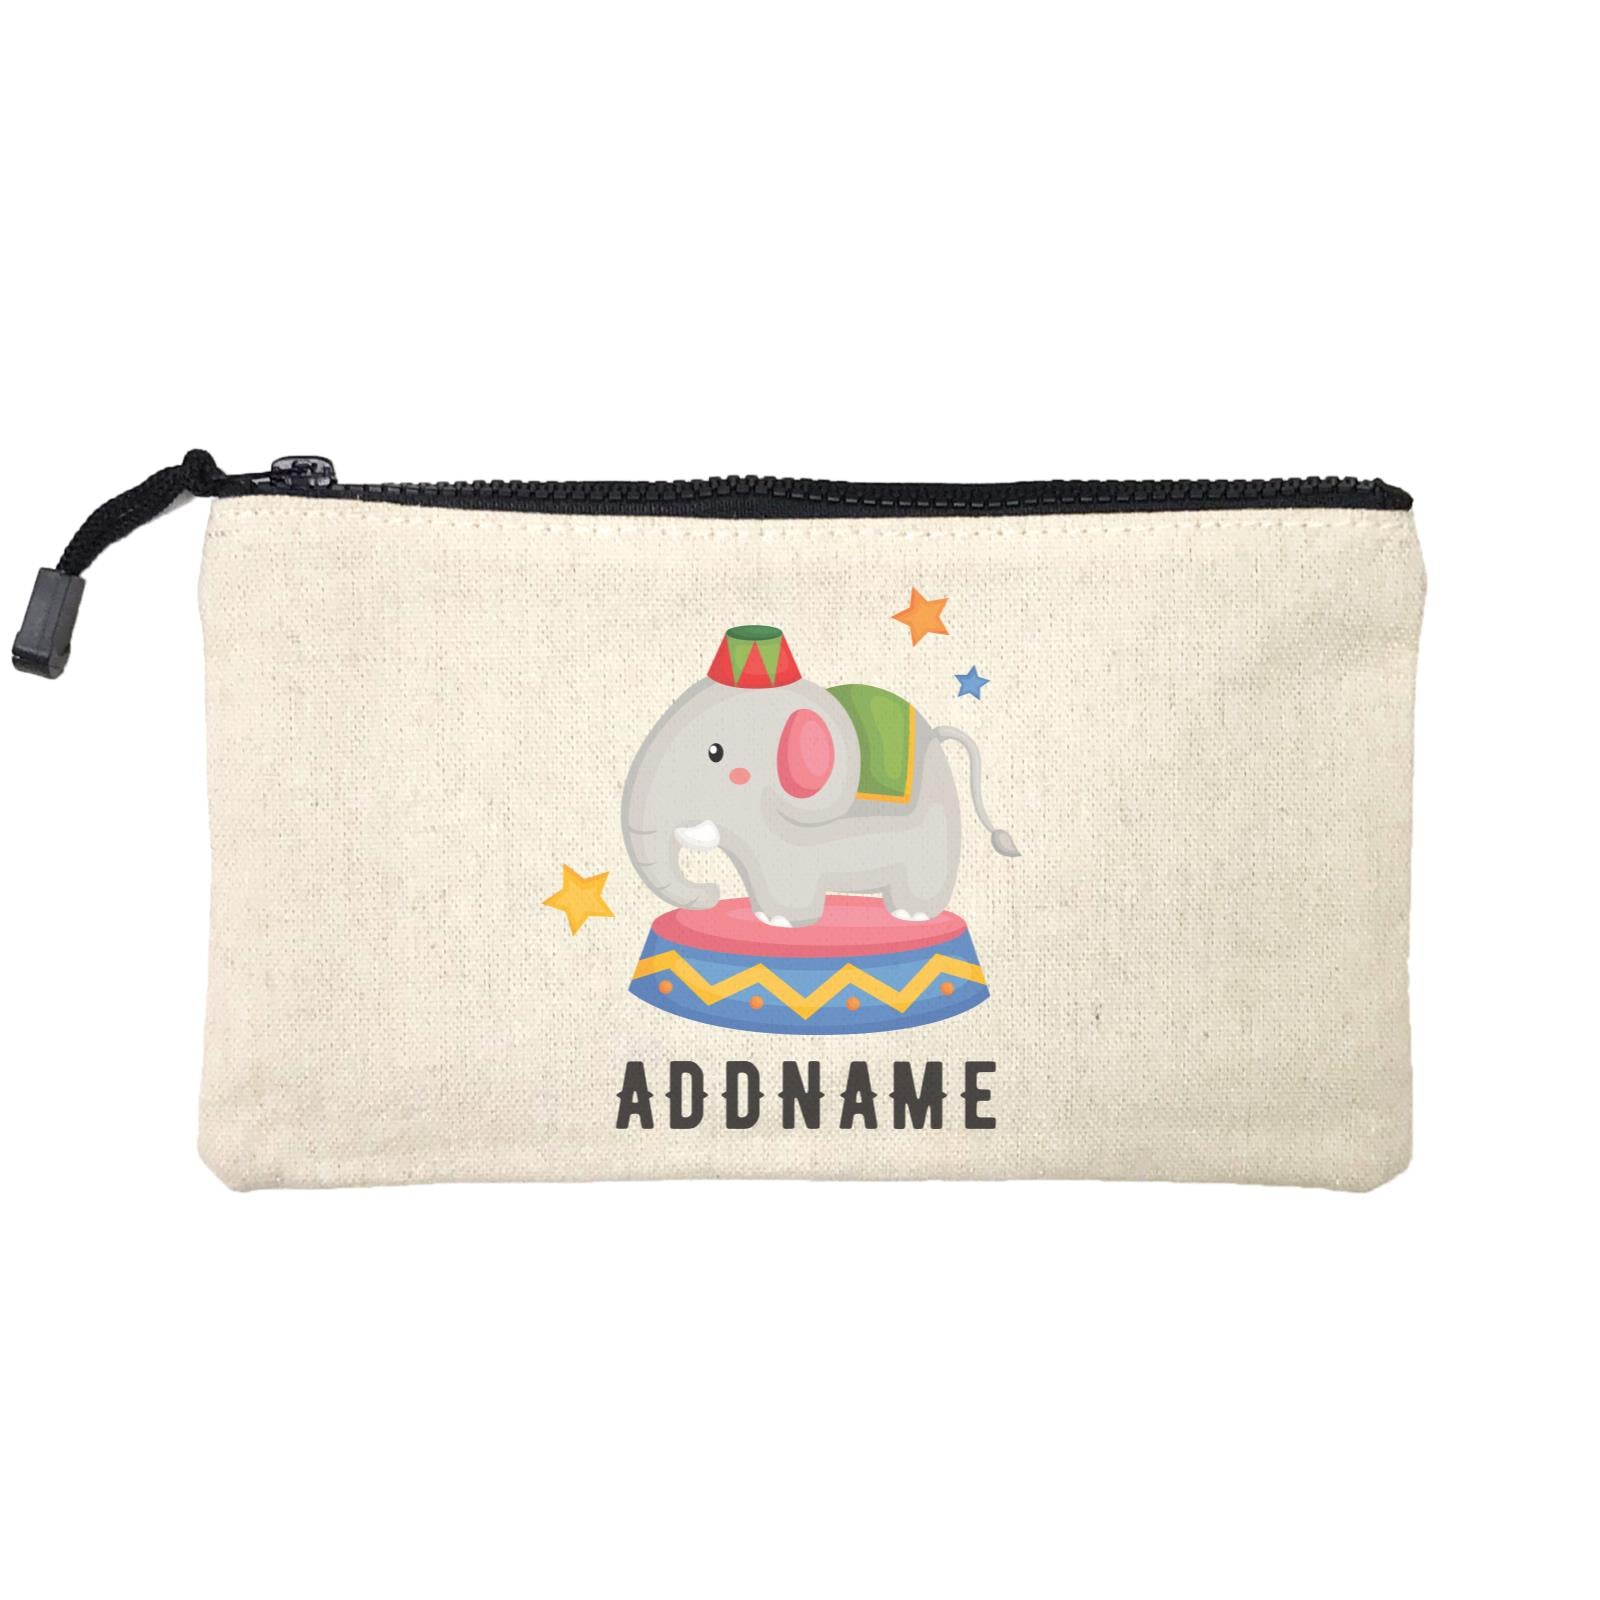 Birthday Circus Elephant Performance Addname Mini Accessories Stationery Pouch